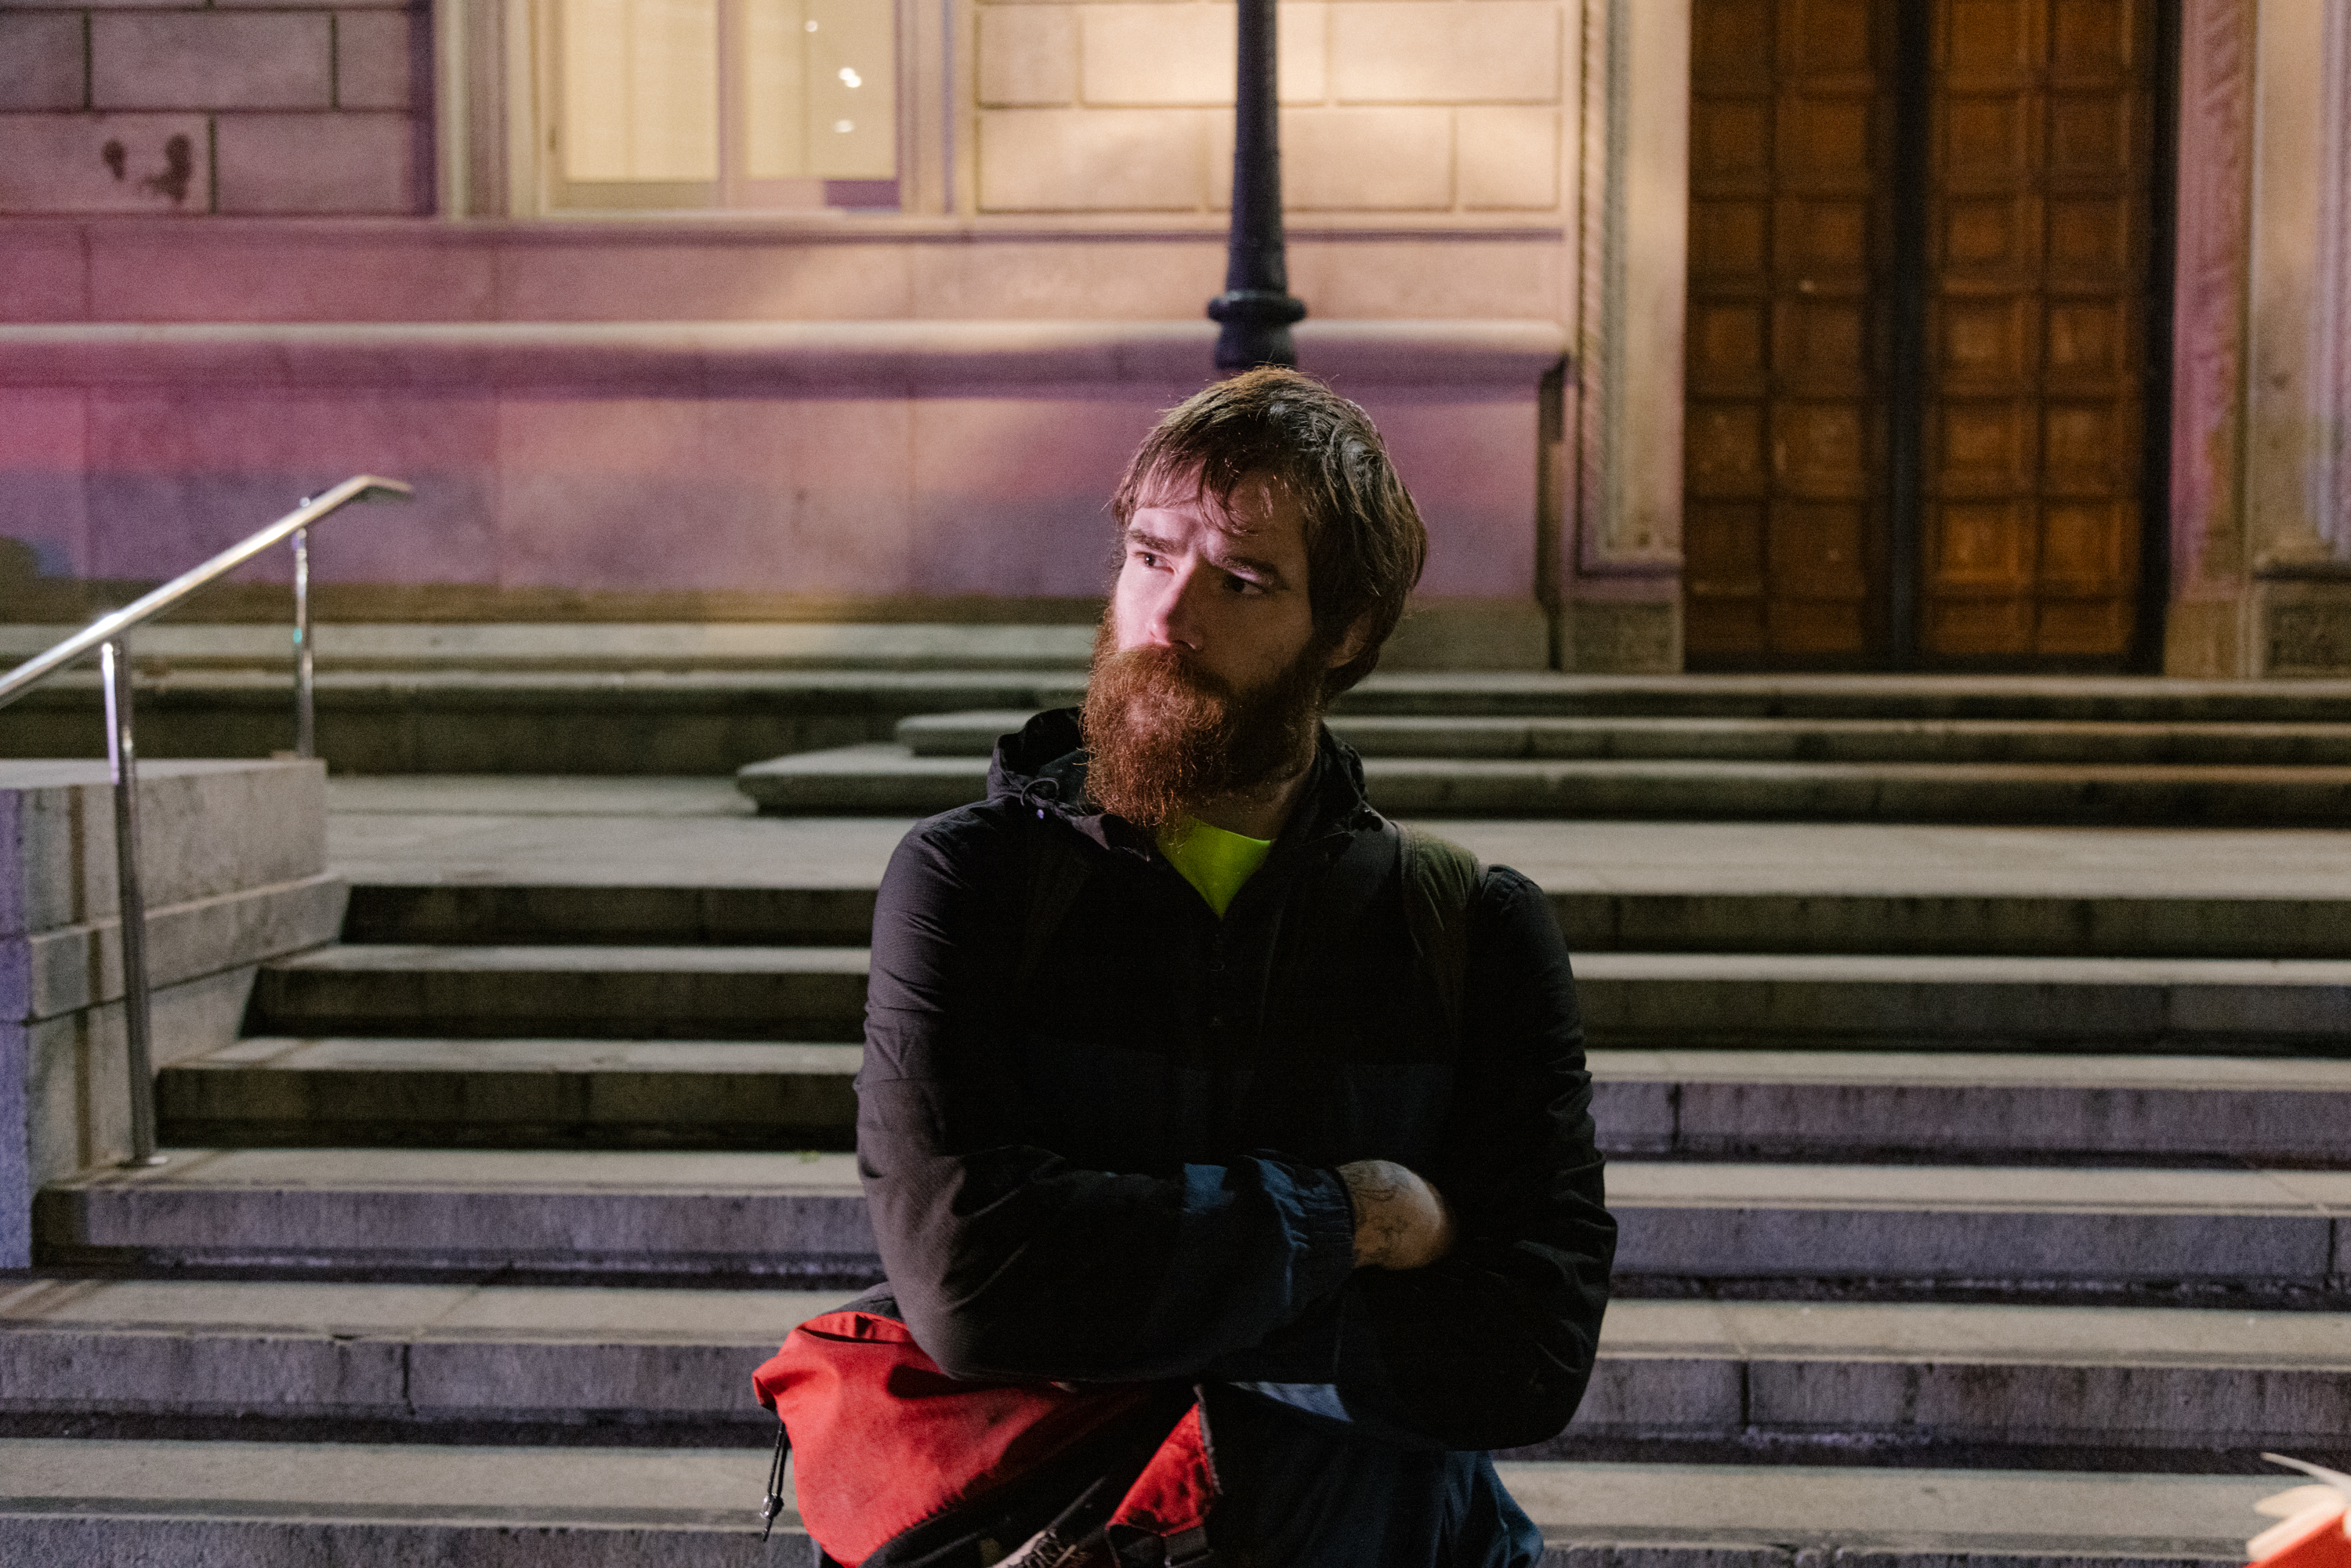 A bearded man carrying a red bag stands before a building at night, arms crossed, deep in thought.